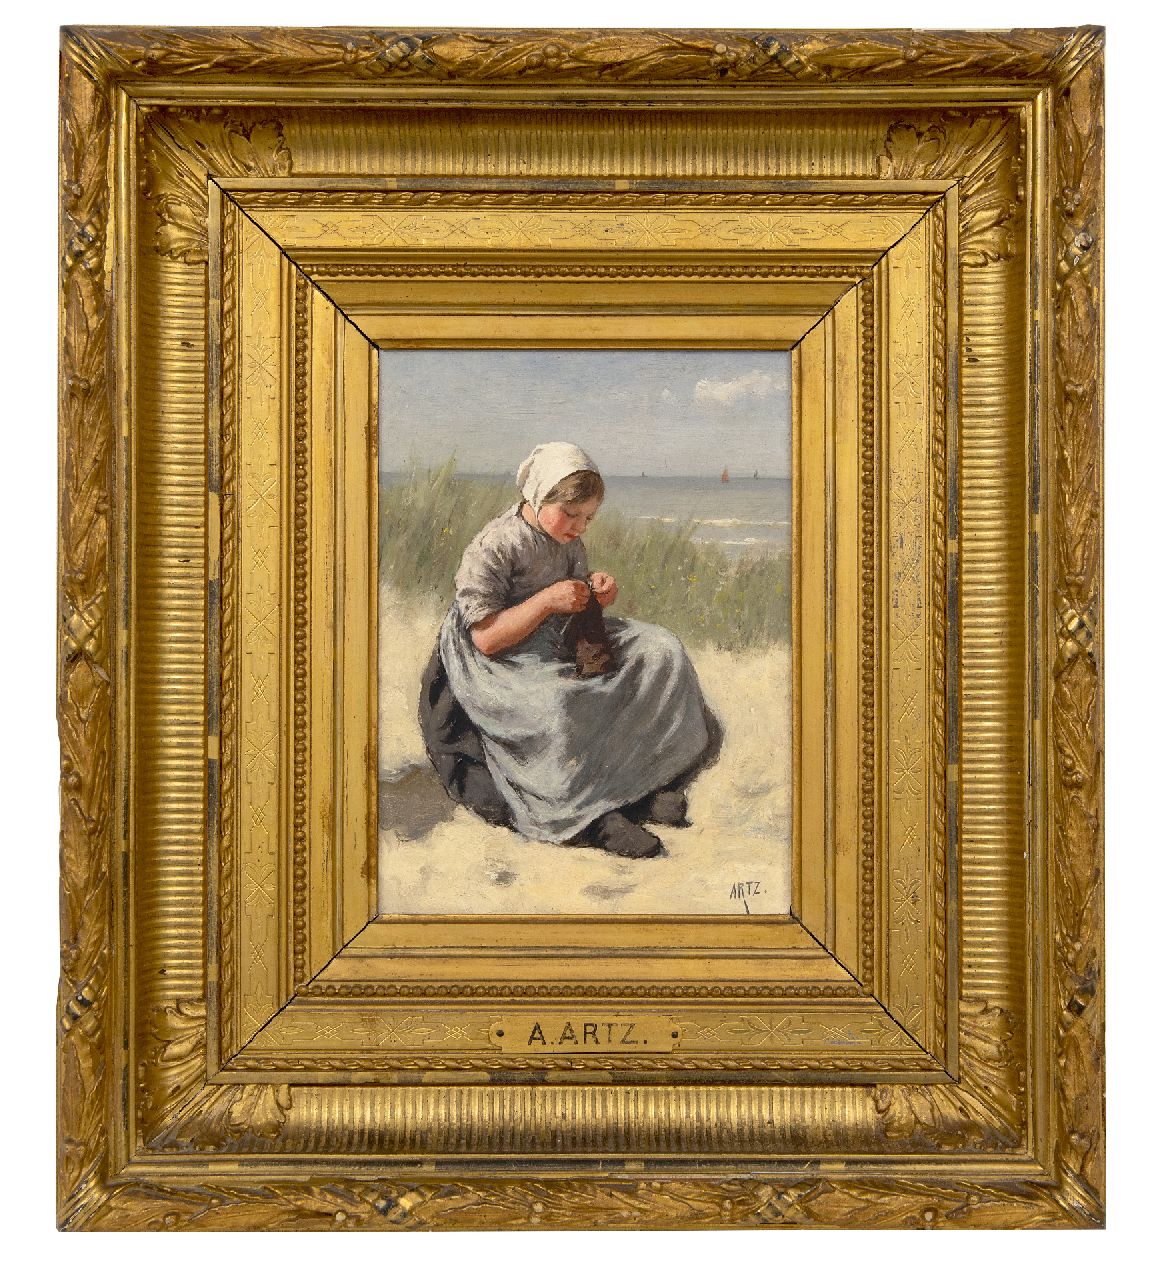 Artz D.A.C.  | David Adolphe Constant Artz | Paintings offered for sale | Girl knitting in the dunes of Katwijk (only together with pendant), oil on panel 22.5 x 16.3 cm, signed l.r.